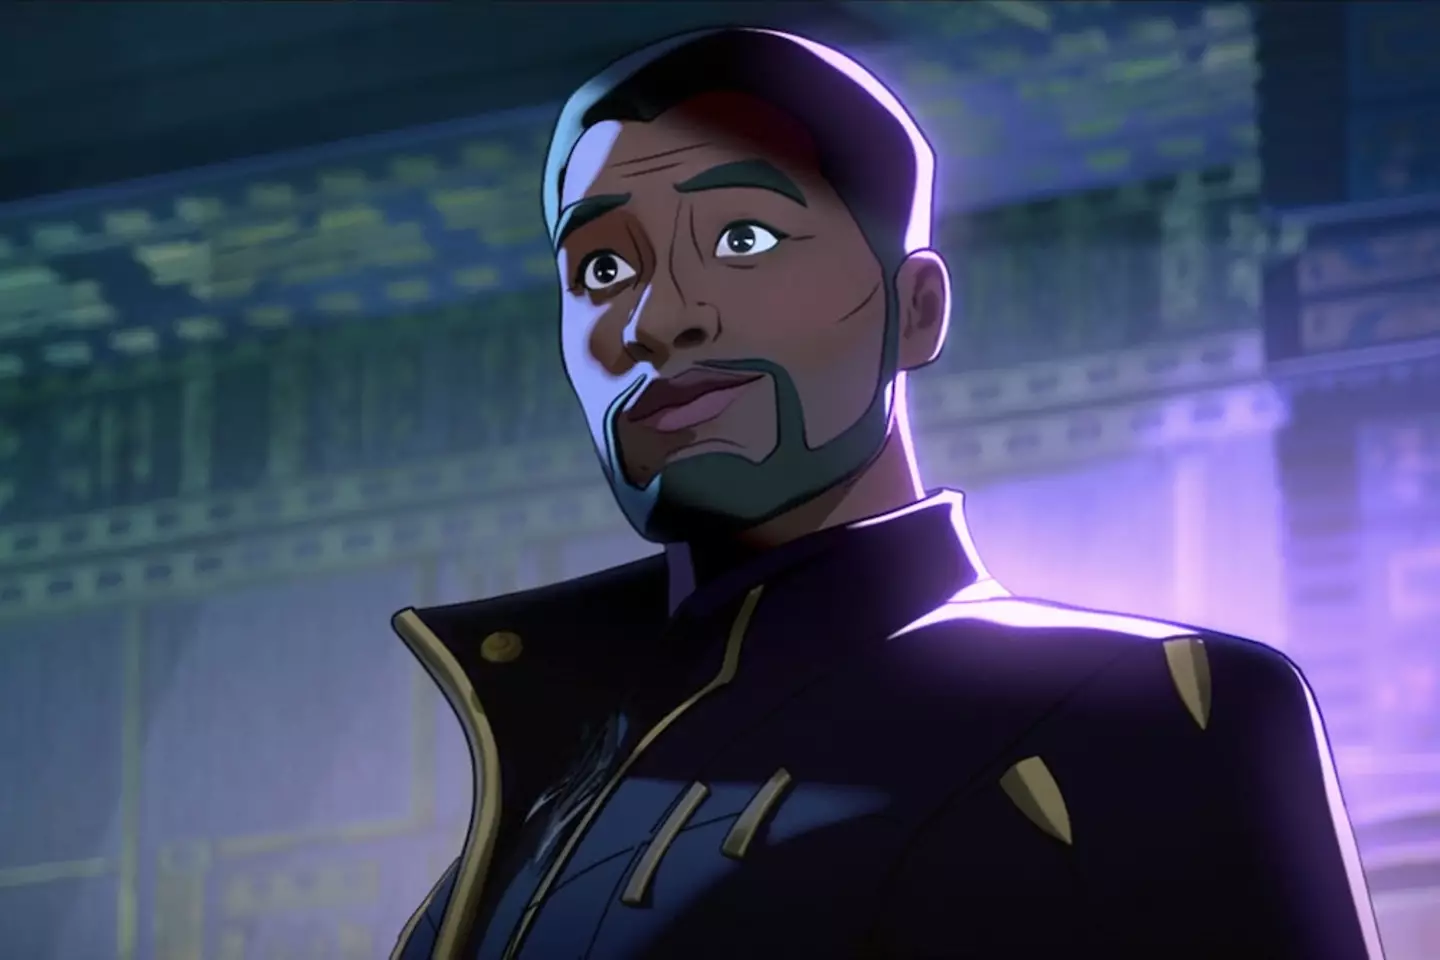 The Black Panther star voiced his animated character for the Marvel series.